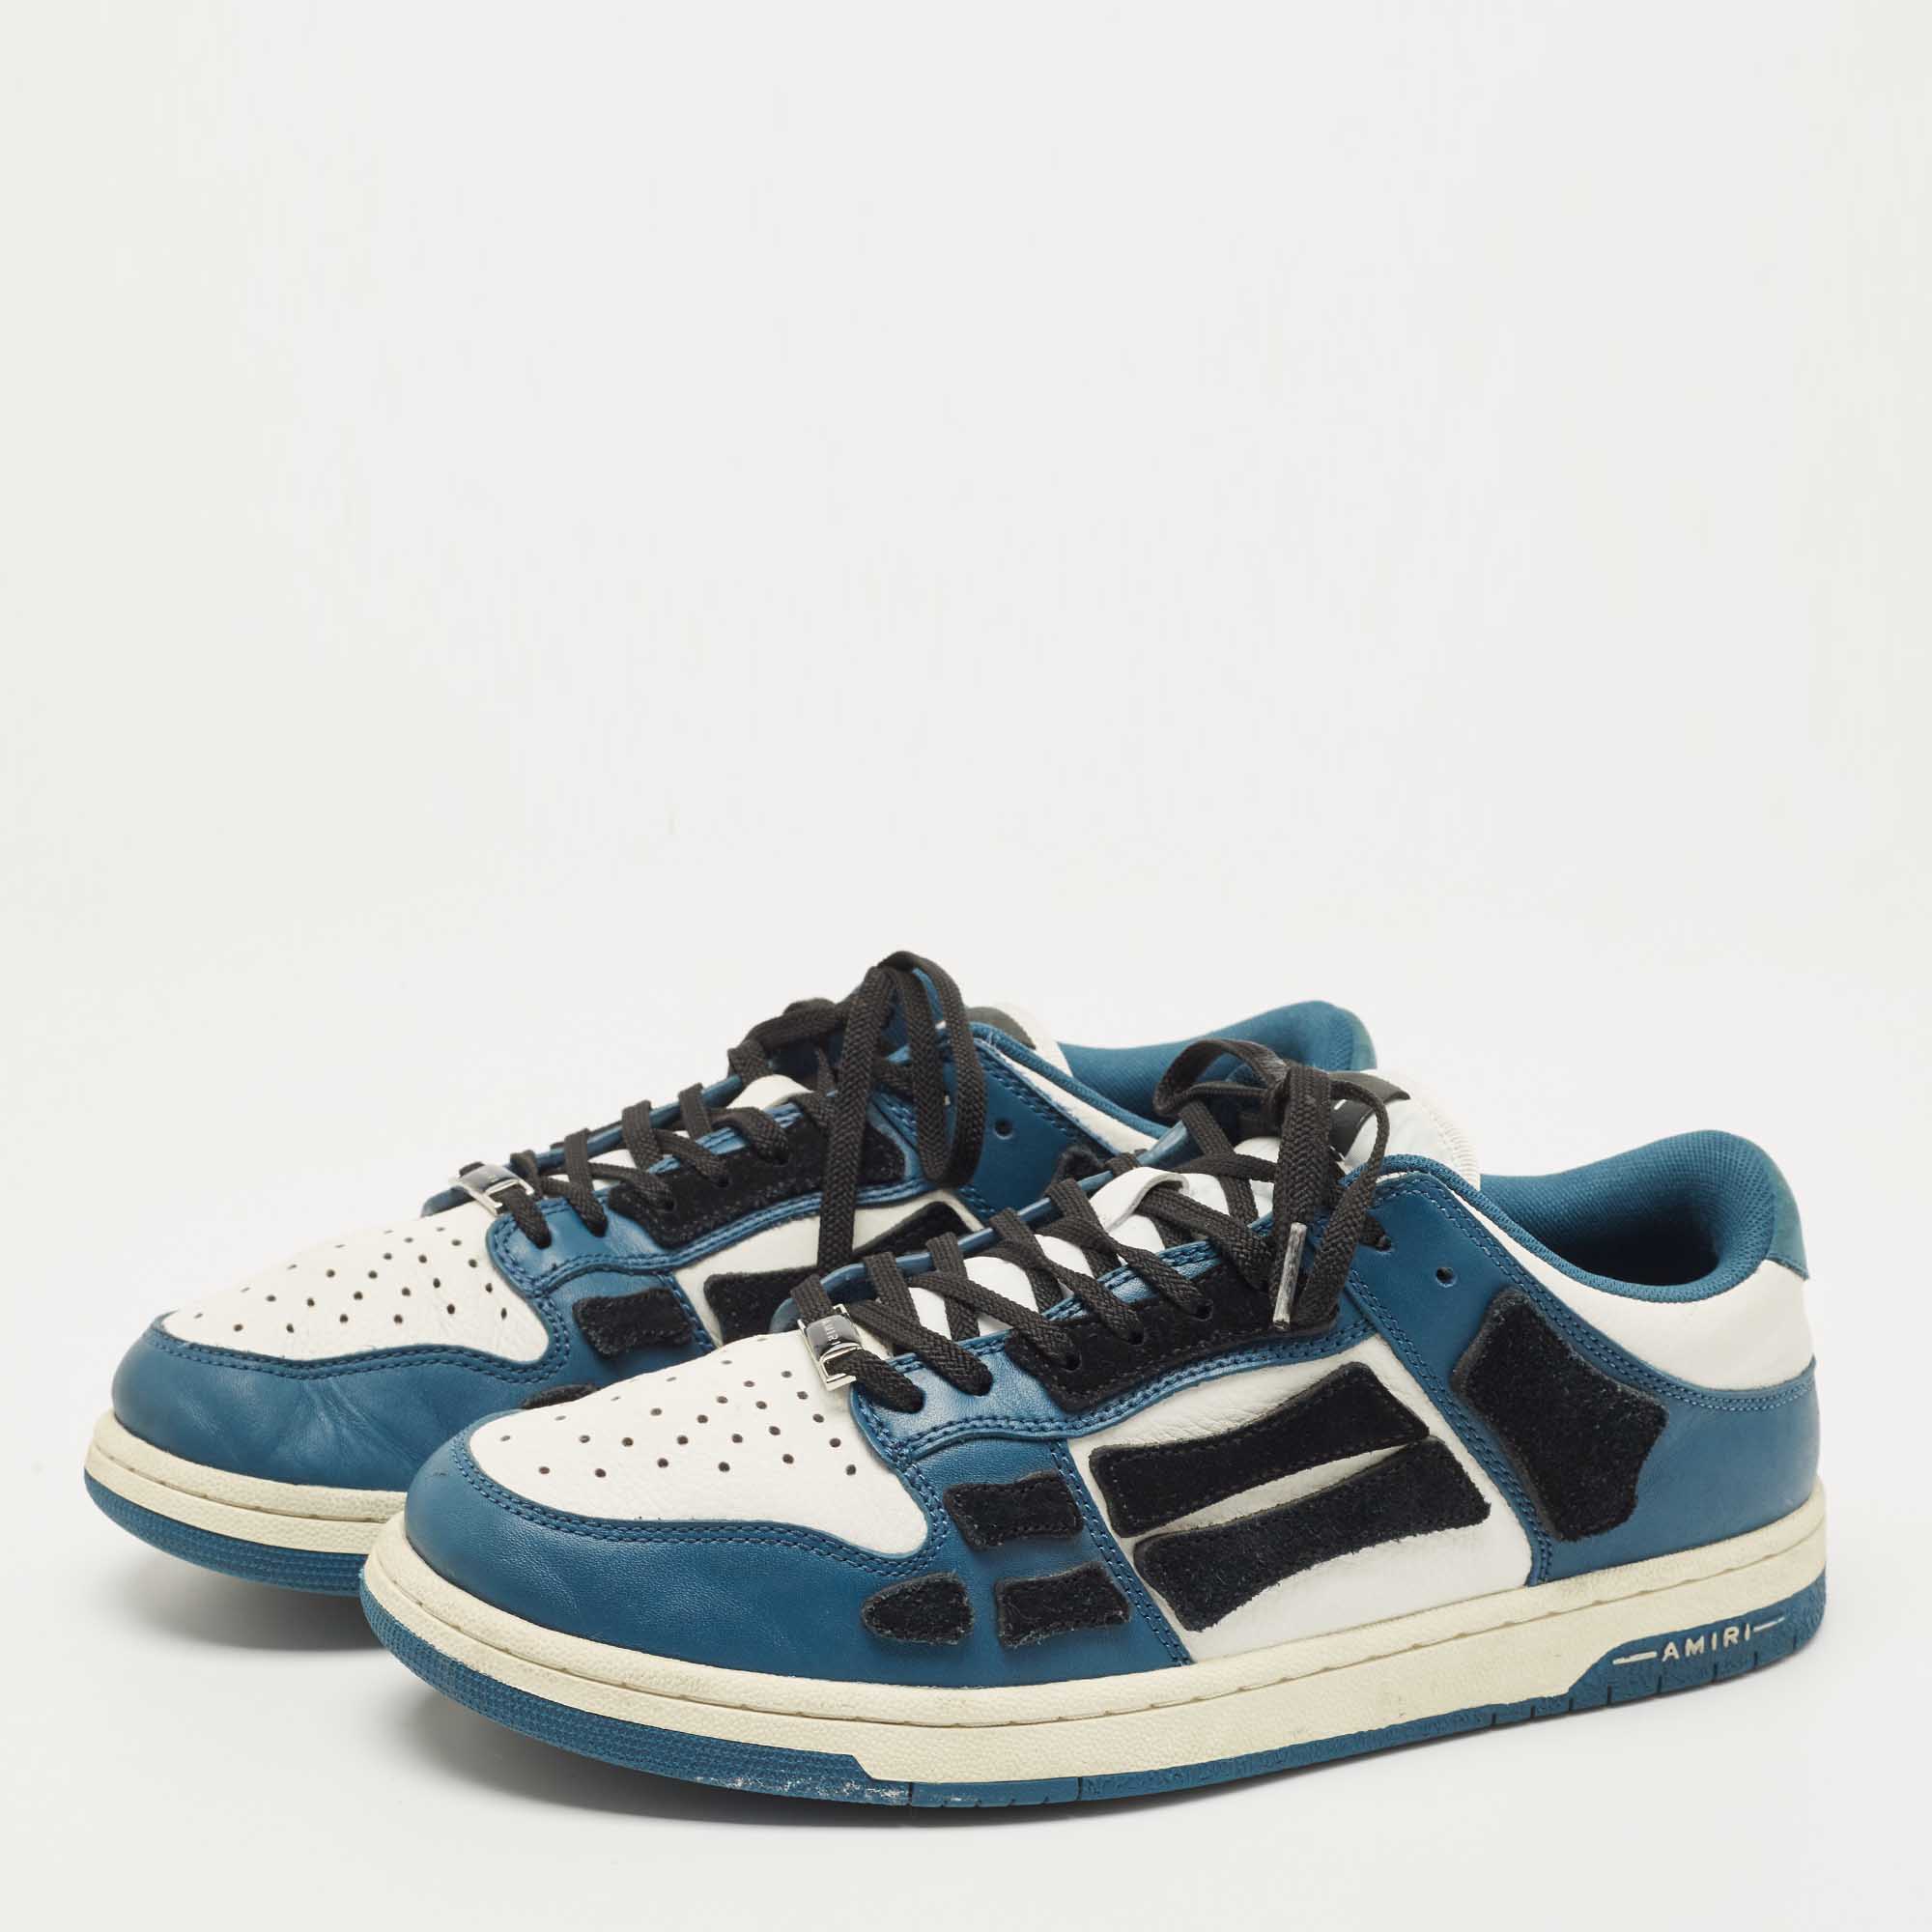 

Amiri Blue/White Leather Skel Low Top Sneakers Size